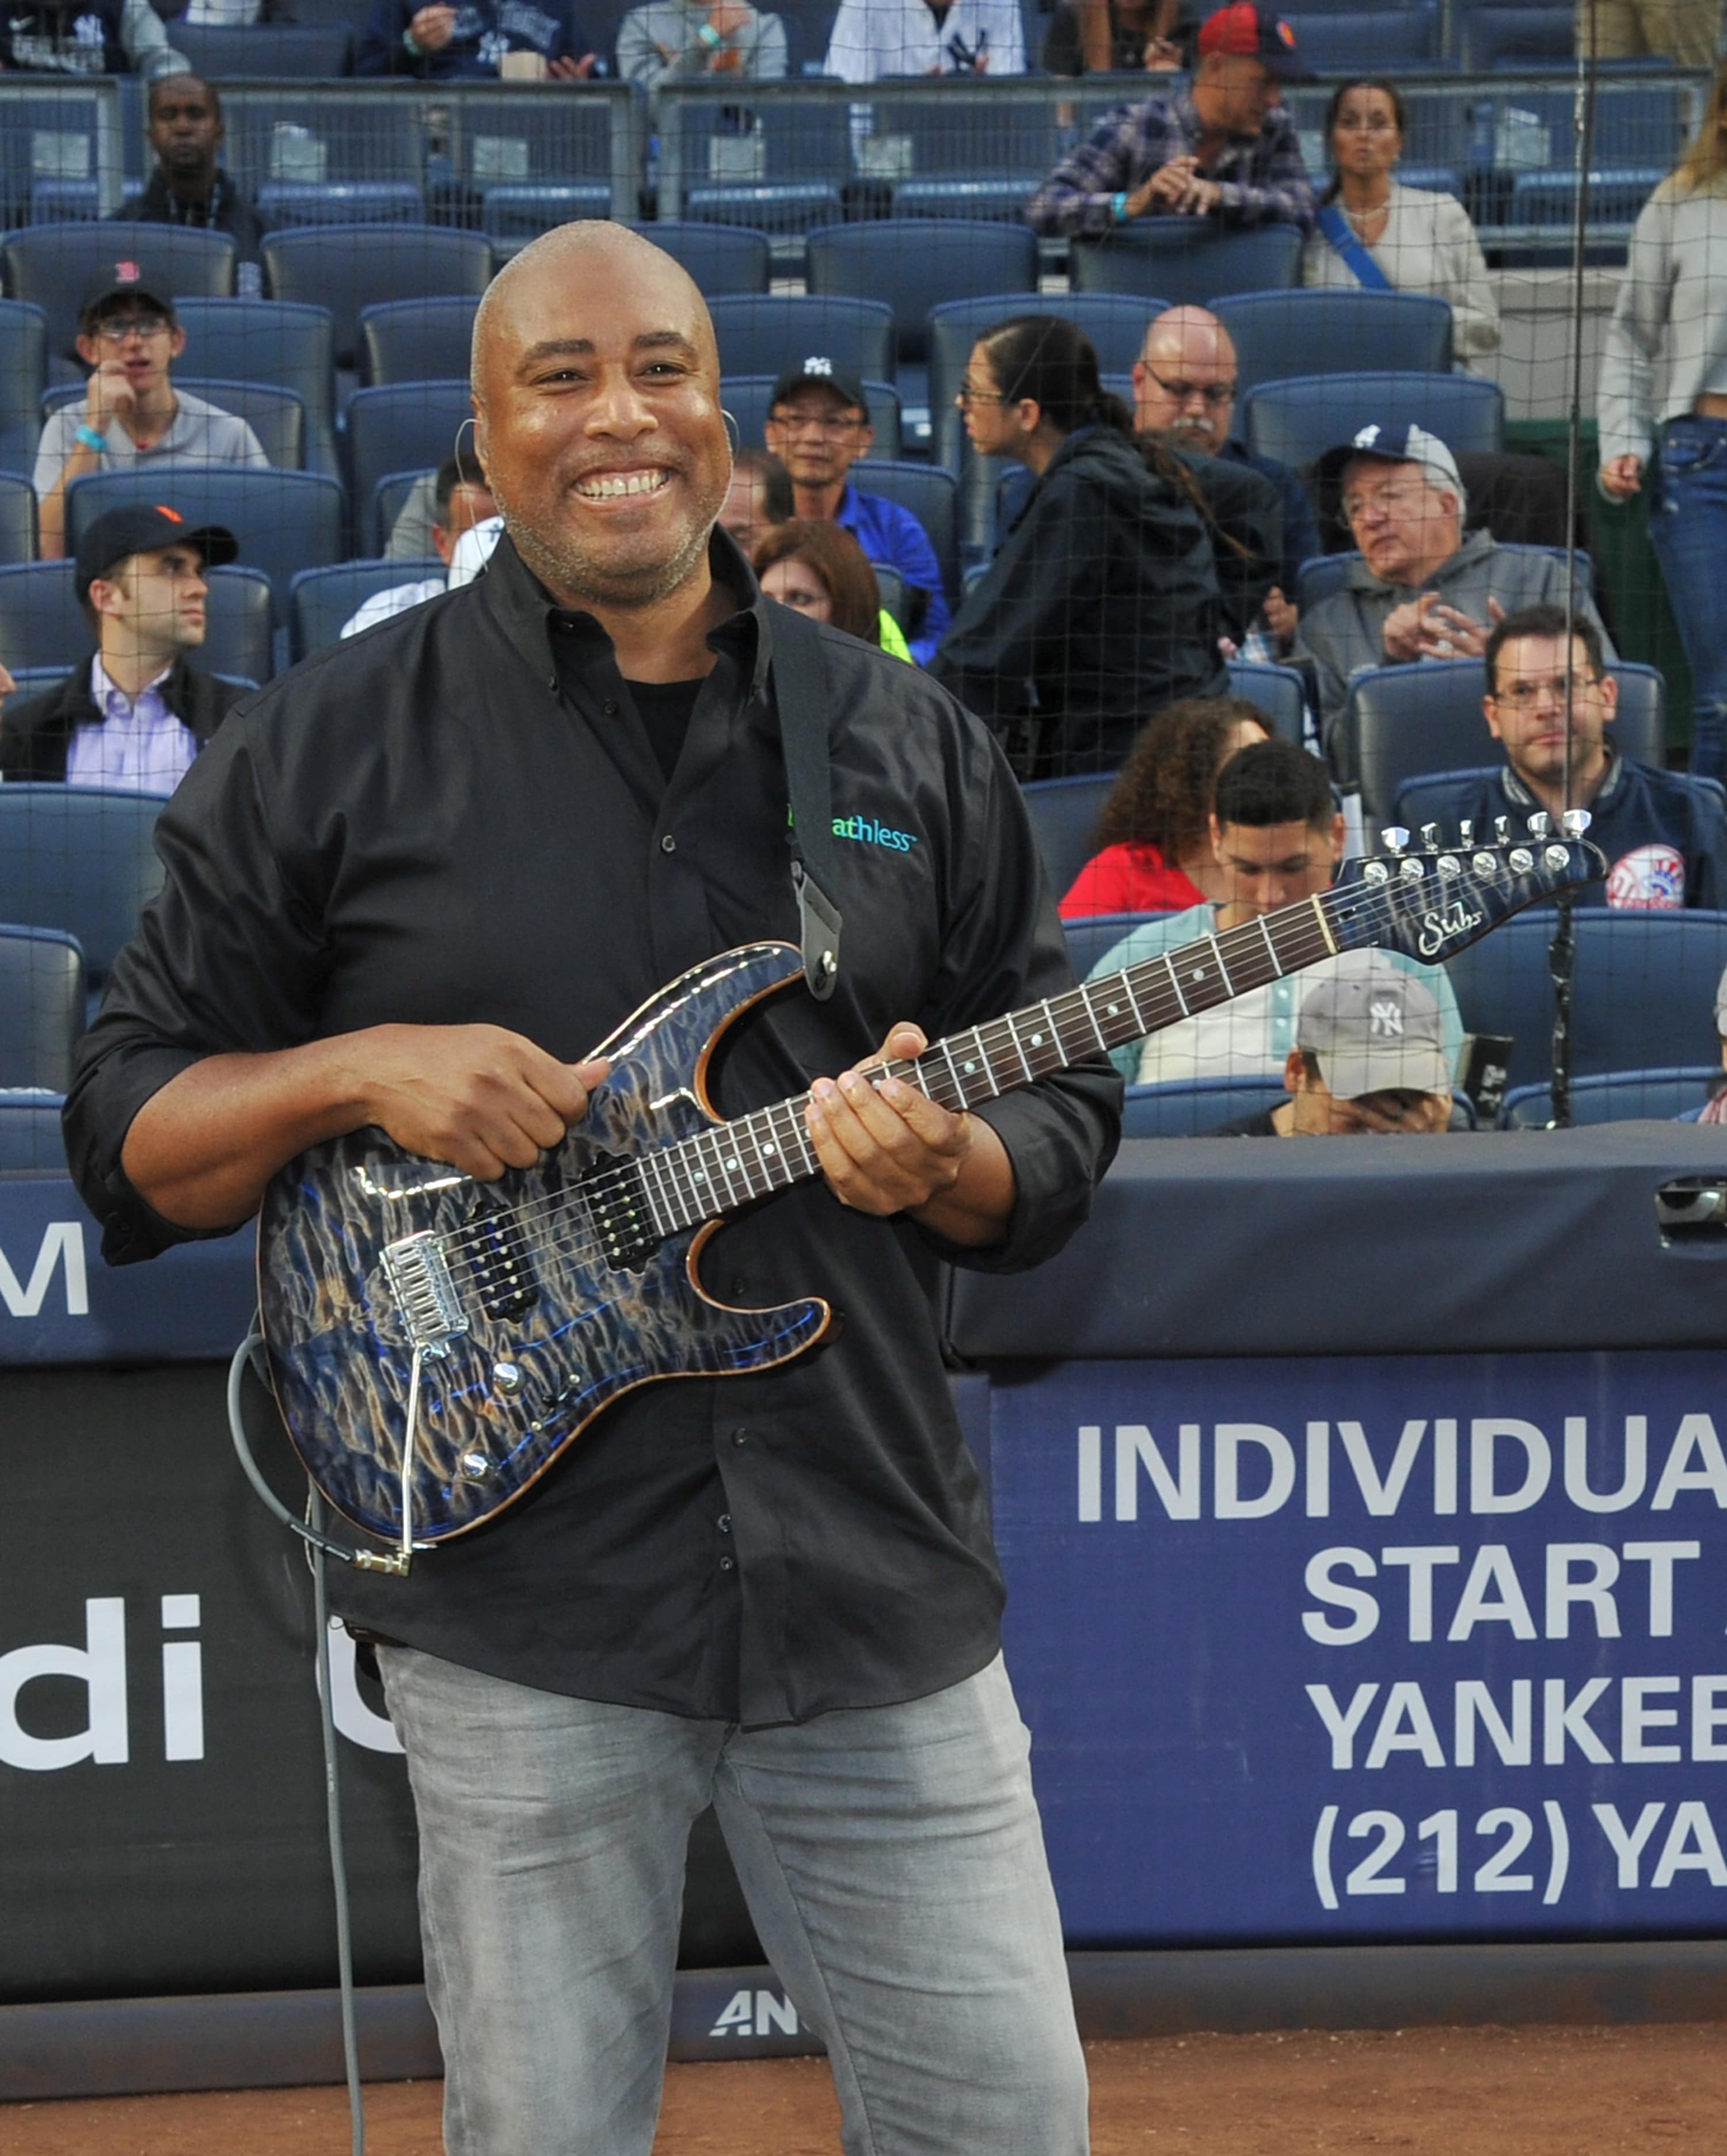 Legendary Yankee and Latin Grammy-nominated musician Bernie Williams performing the national anthem at Yankee Stadium during Pulmonary Fibrosis Awareness Month in honor of his father who passed away from the rare lung disease idiopathic pulmonary fibrosis (IPF). Learn more at www.BreathlessIPF.com. #BreathlessIPF